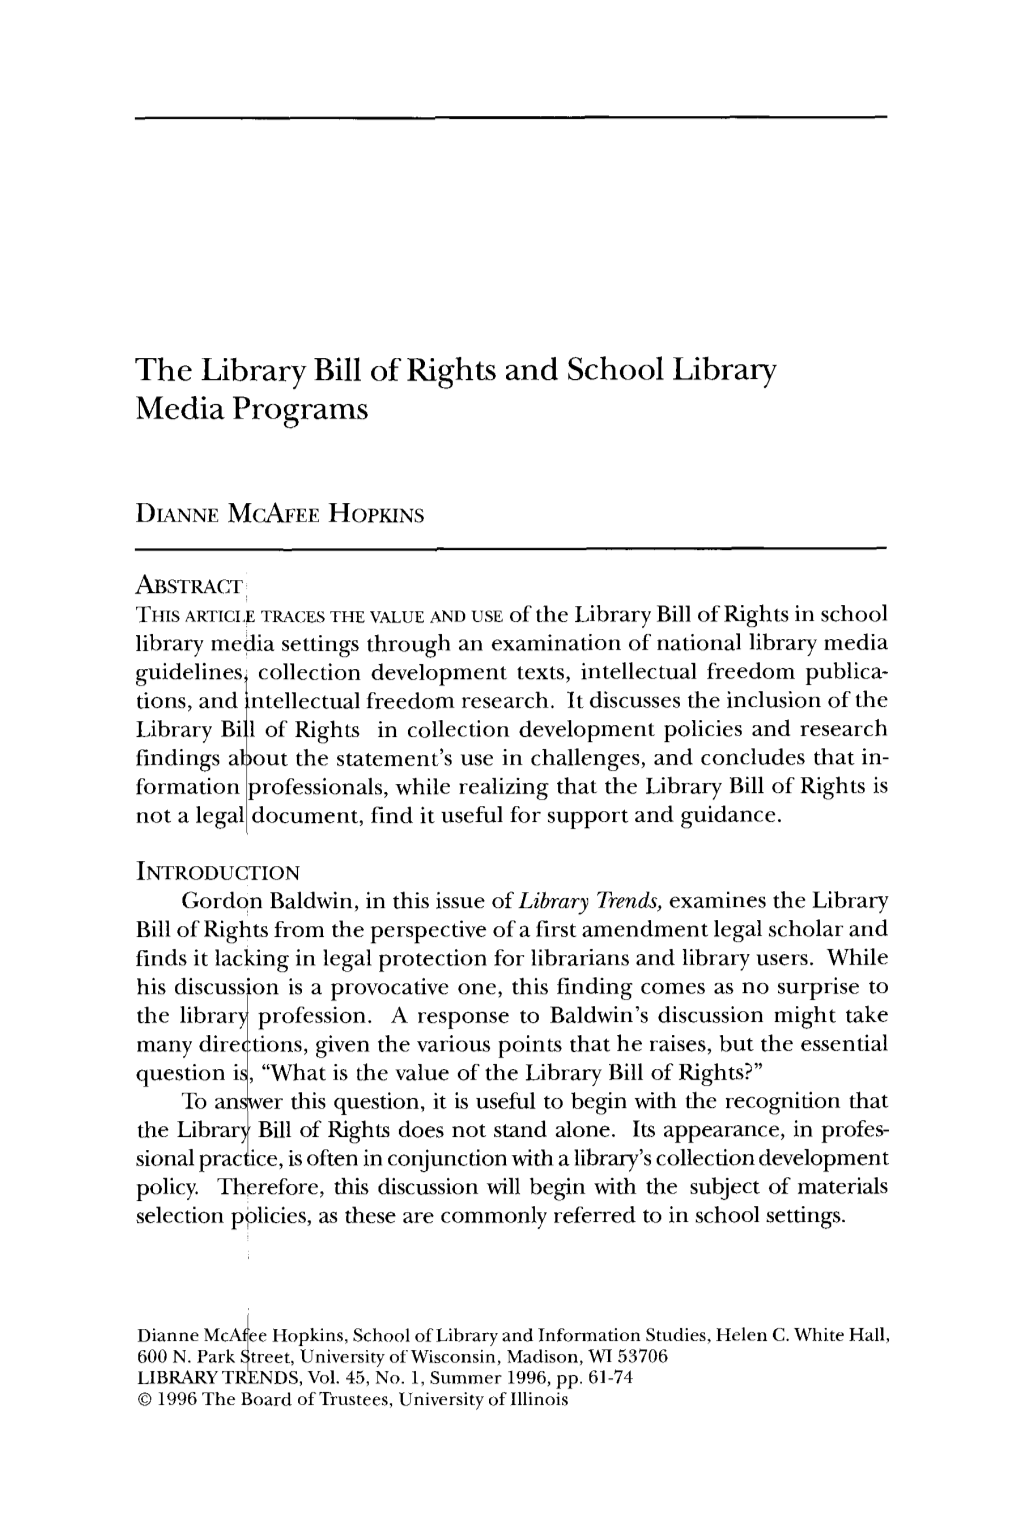 The Library Bill of Rights and School Library Media Programs